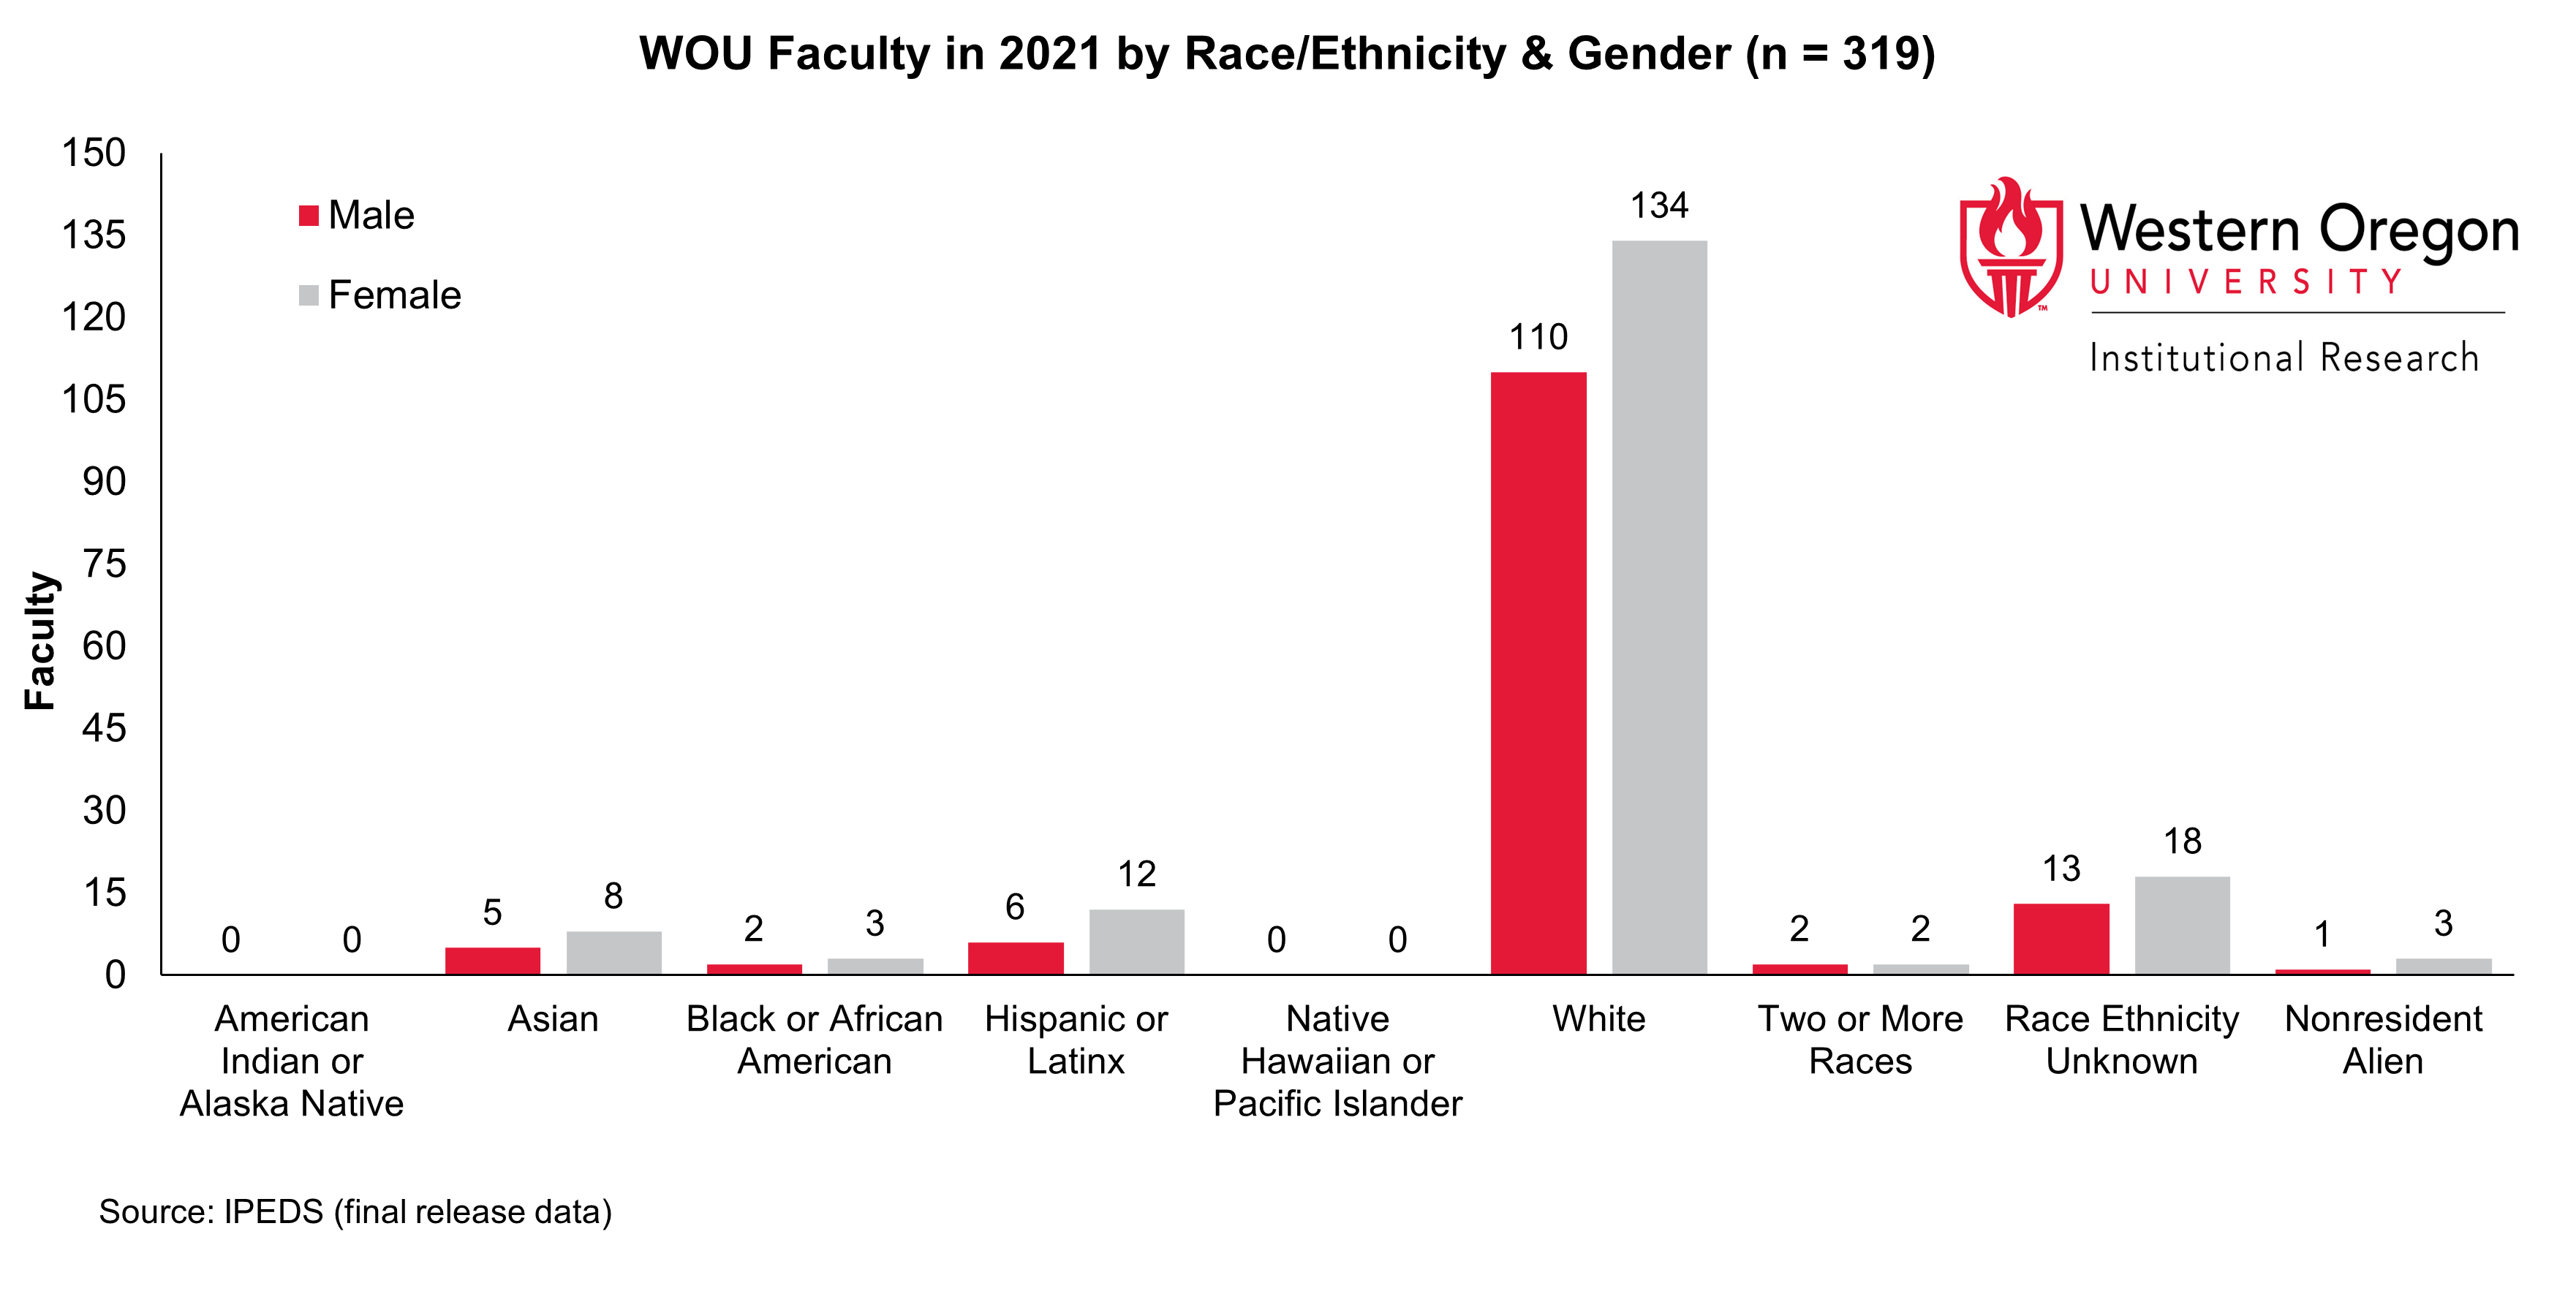 Bar graph of counts for faculty at WOU in the most recent year, broken out by race/ethnicity categories and gender, showing that female faculty outnumber male faculty